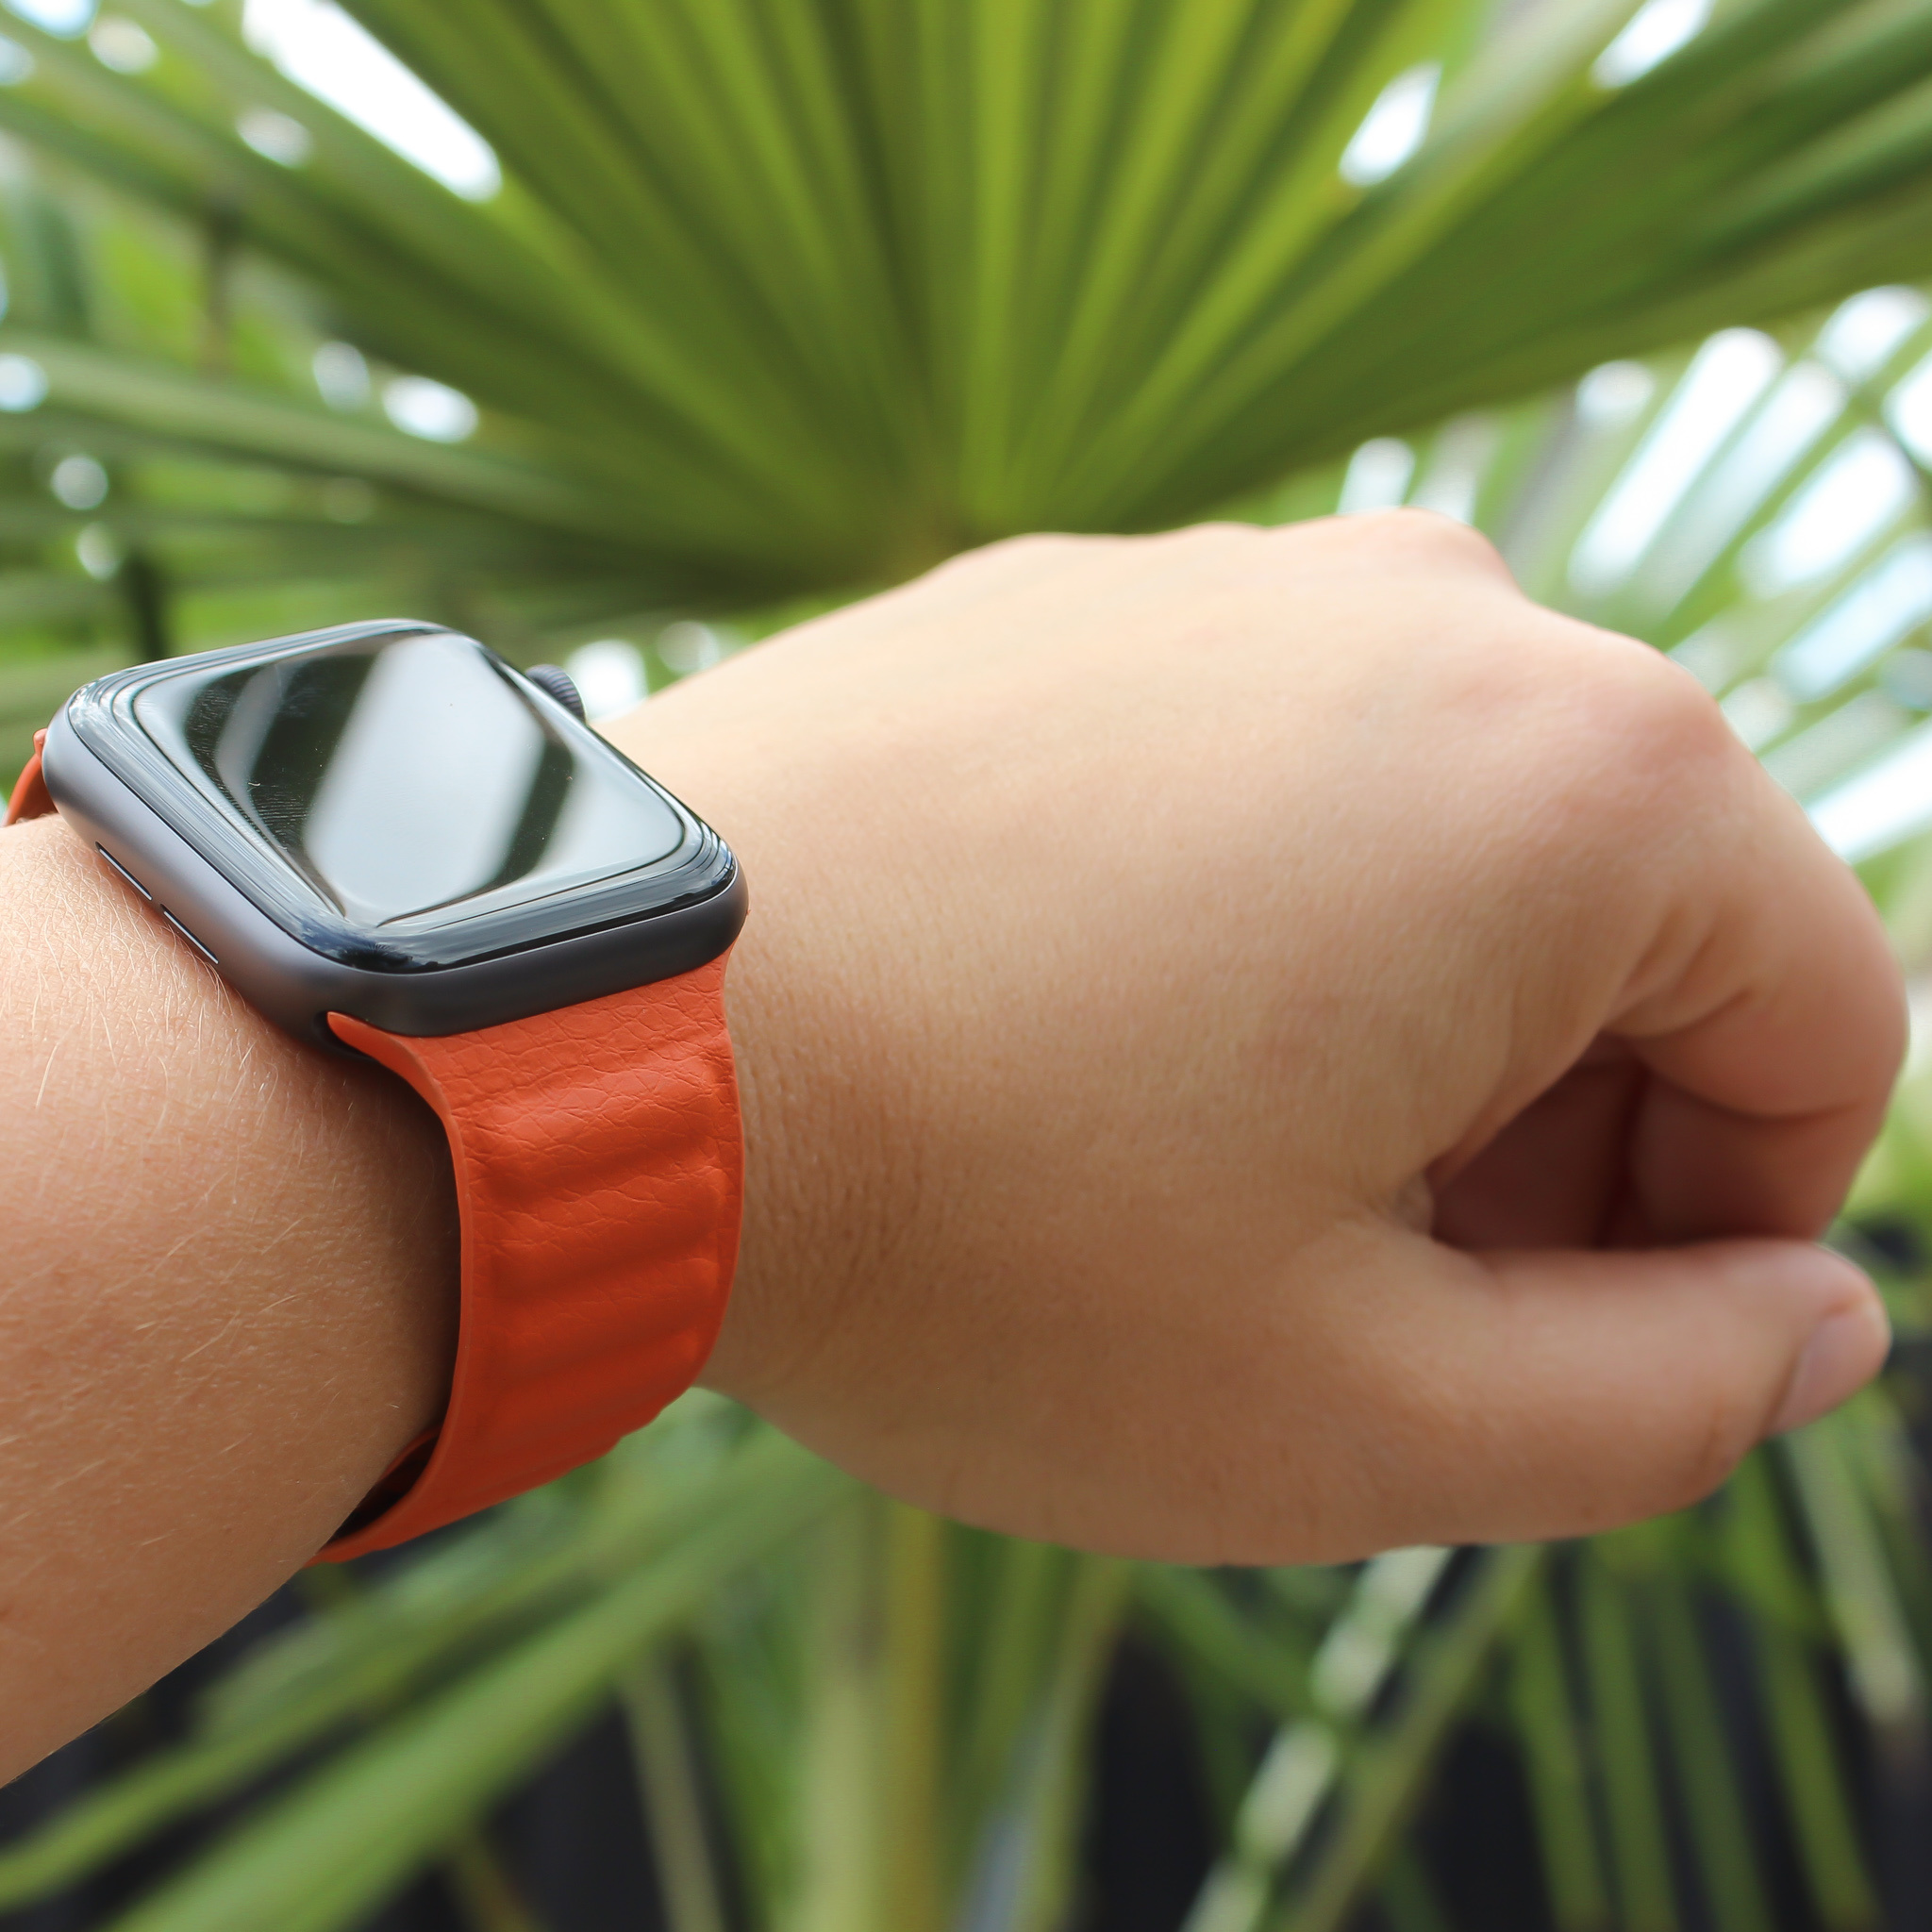 Apple Watch Leather Solo Strap - Sunset